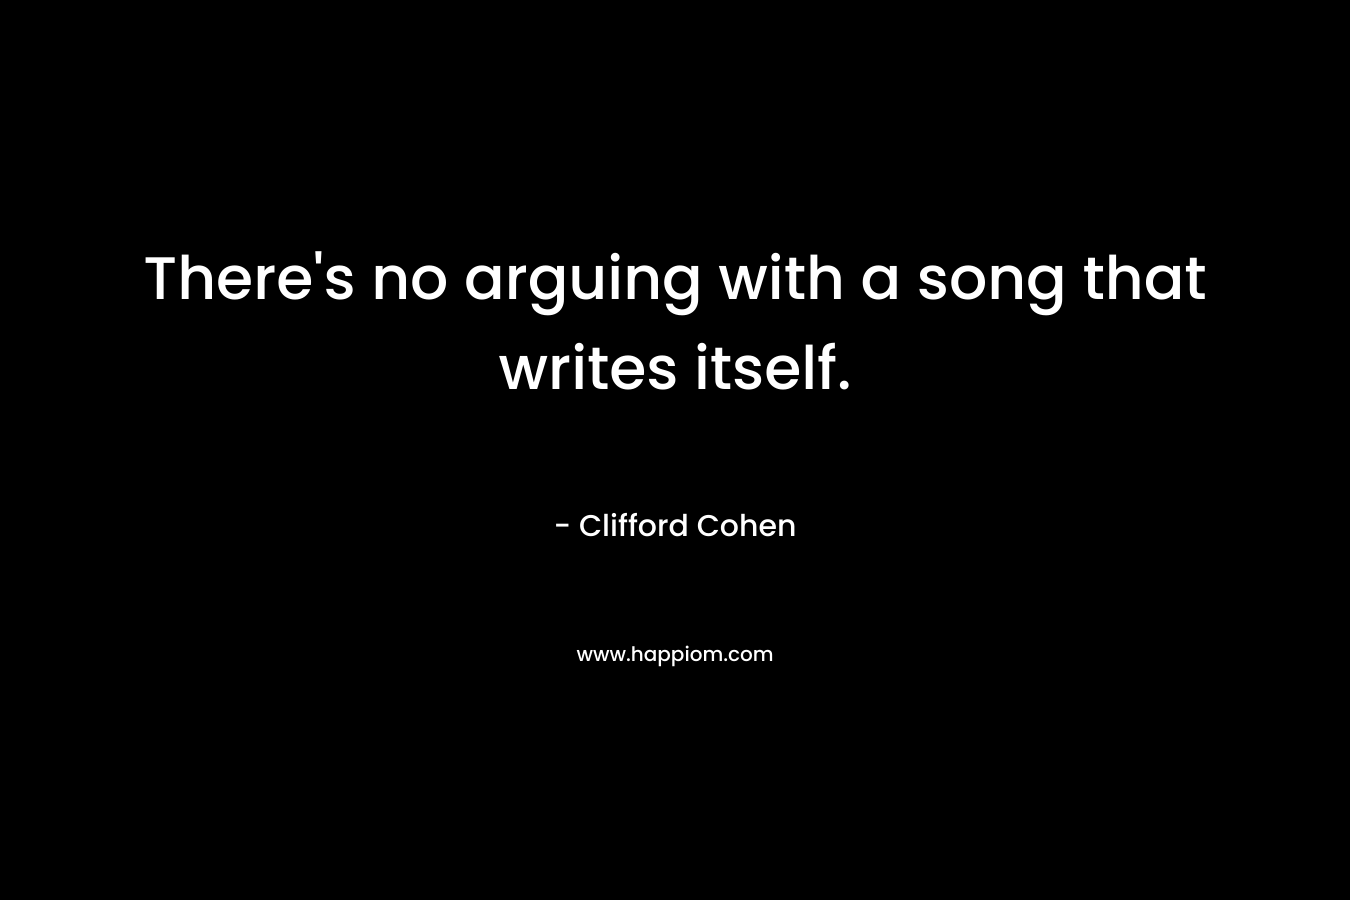 There’s no arguing with a song that writes itself. – Clifford Cohen